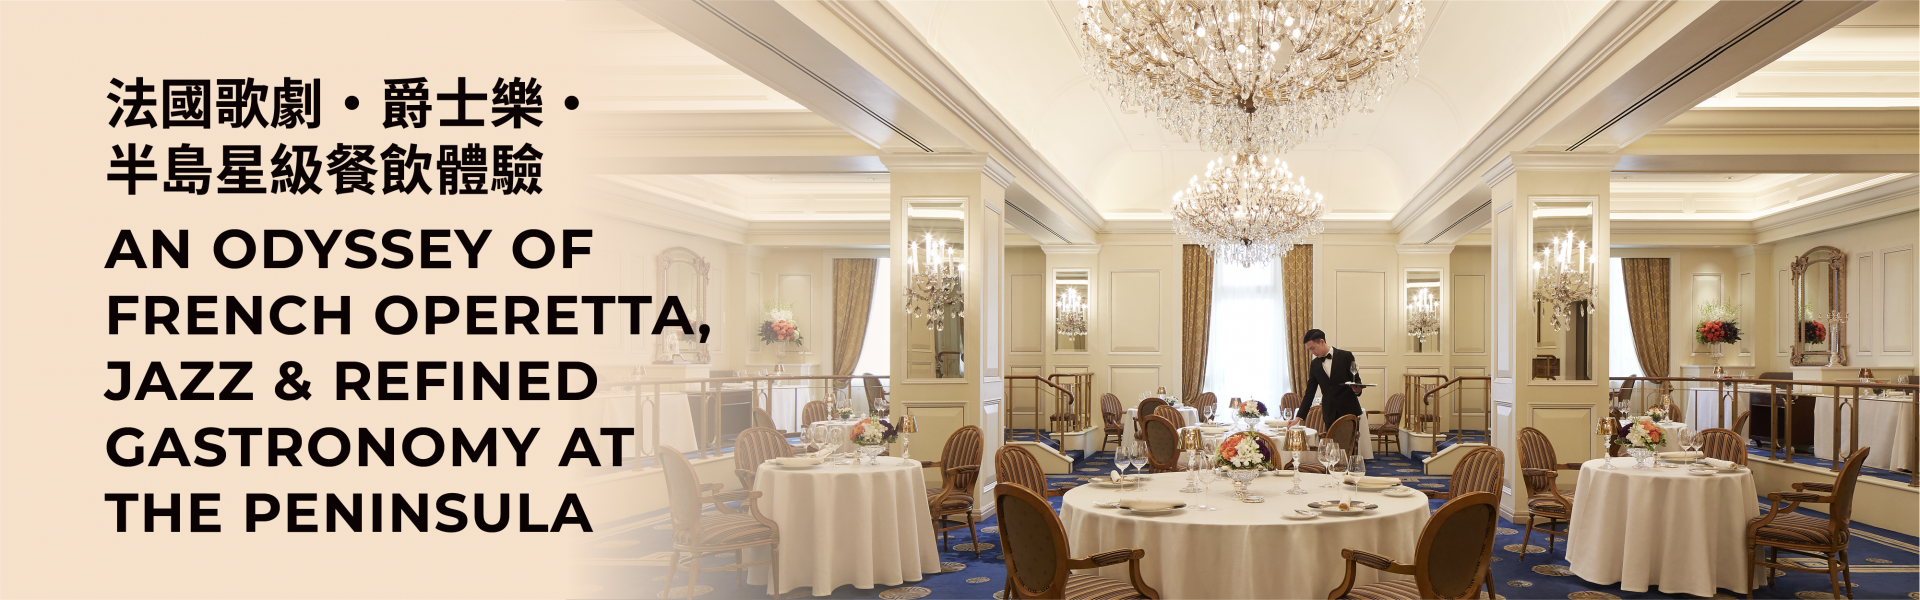 AN ODYSSEY OF FRENCH OPERETTA, JAZZ & REFINED GASTRONOMY AT THE PENINSULA